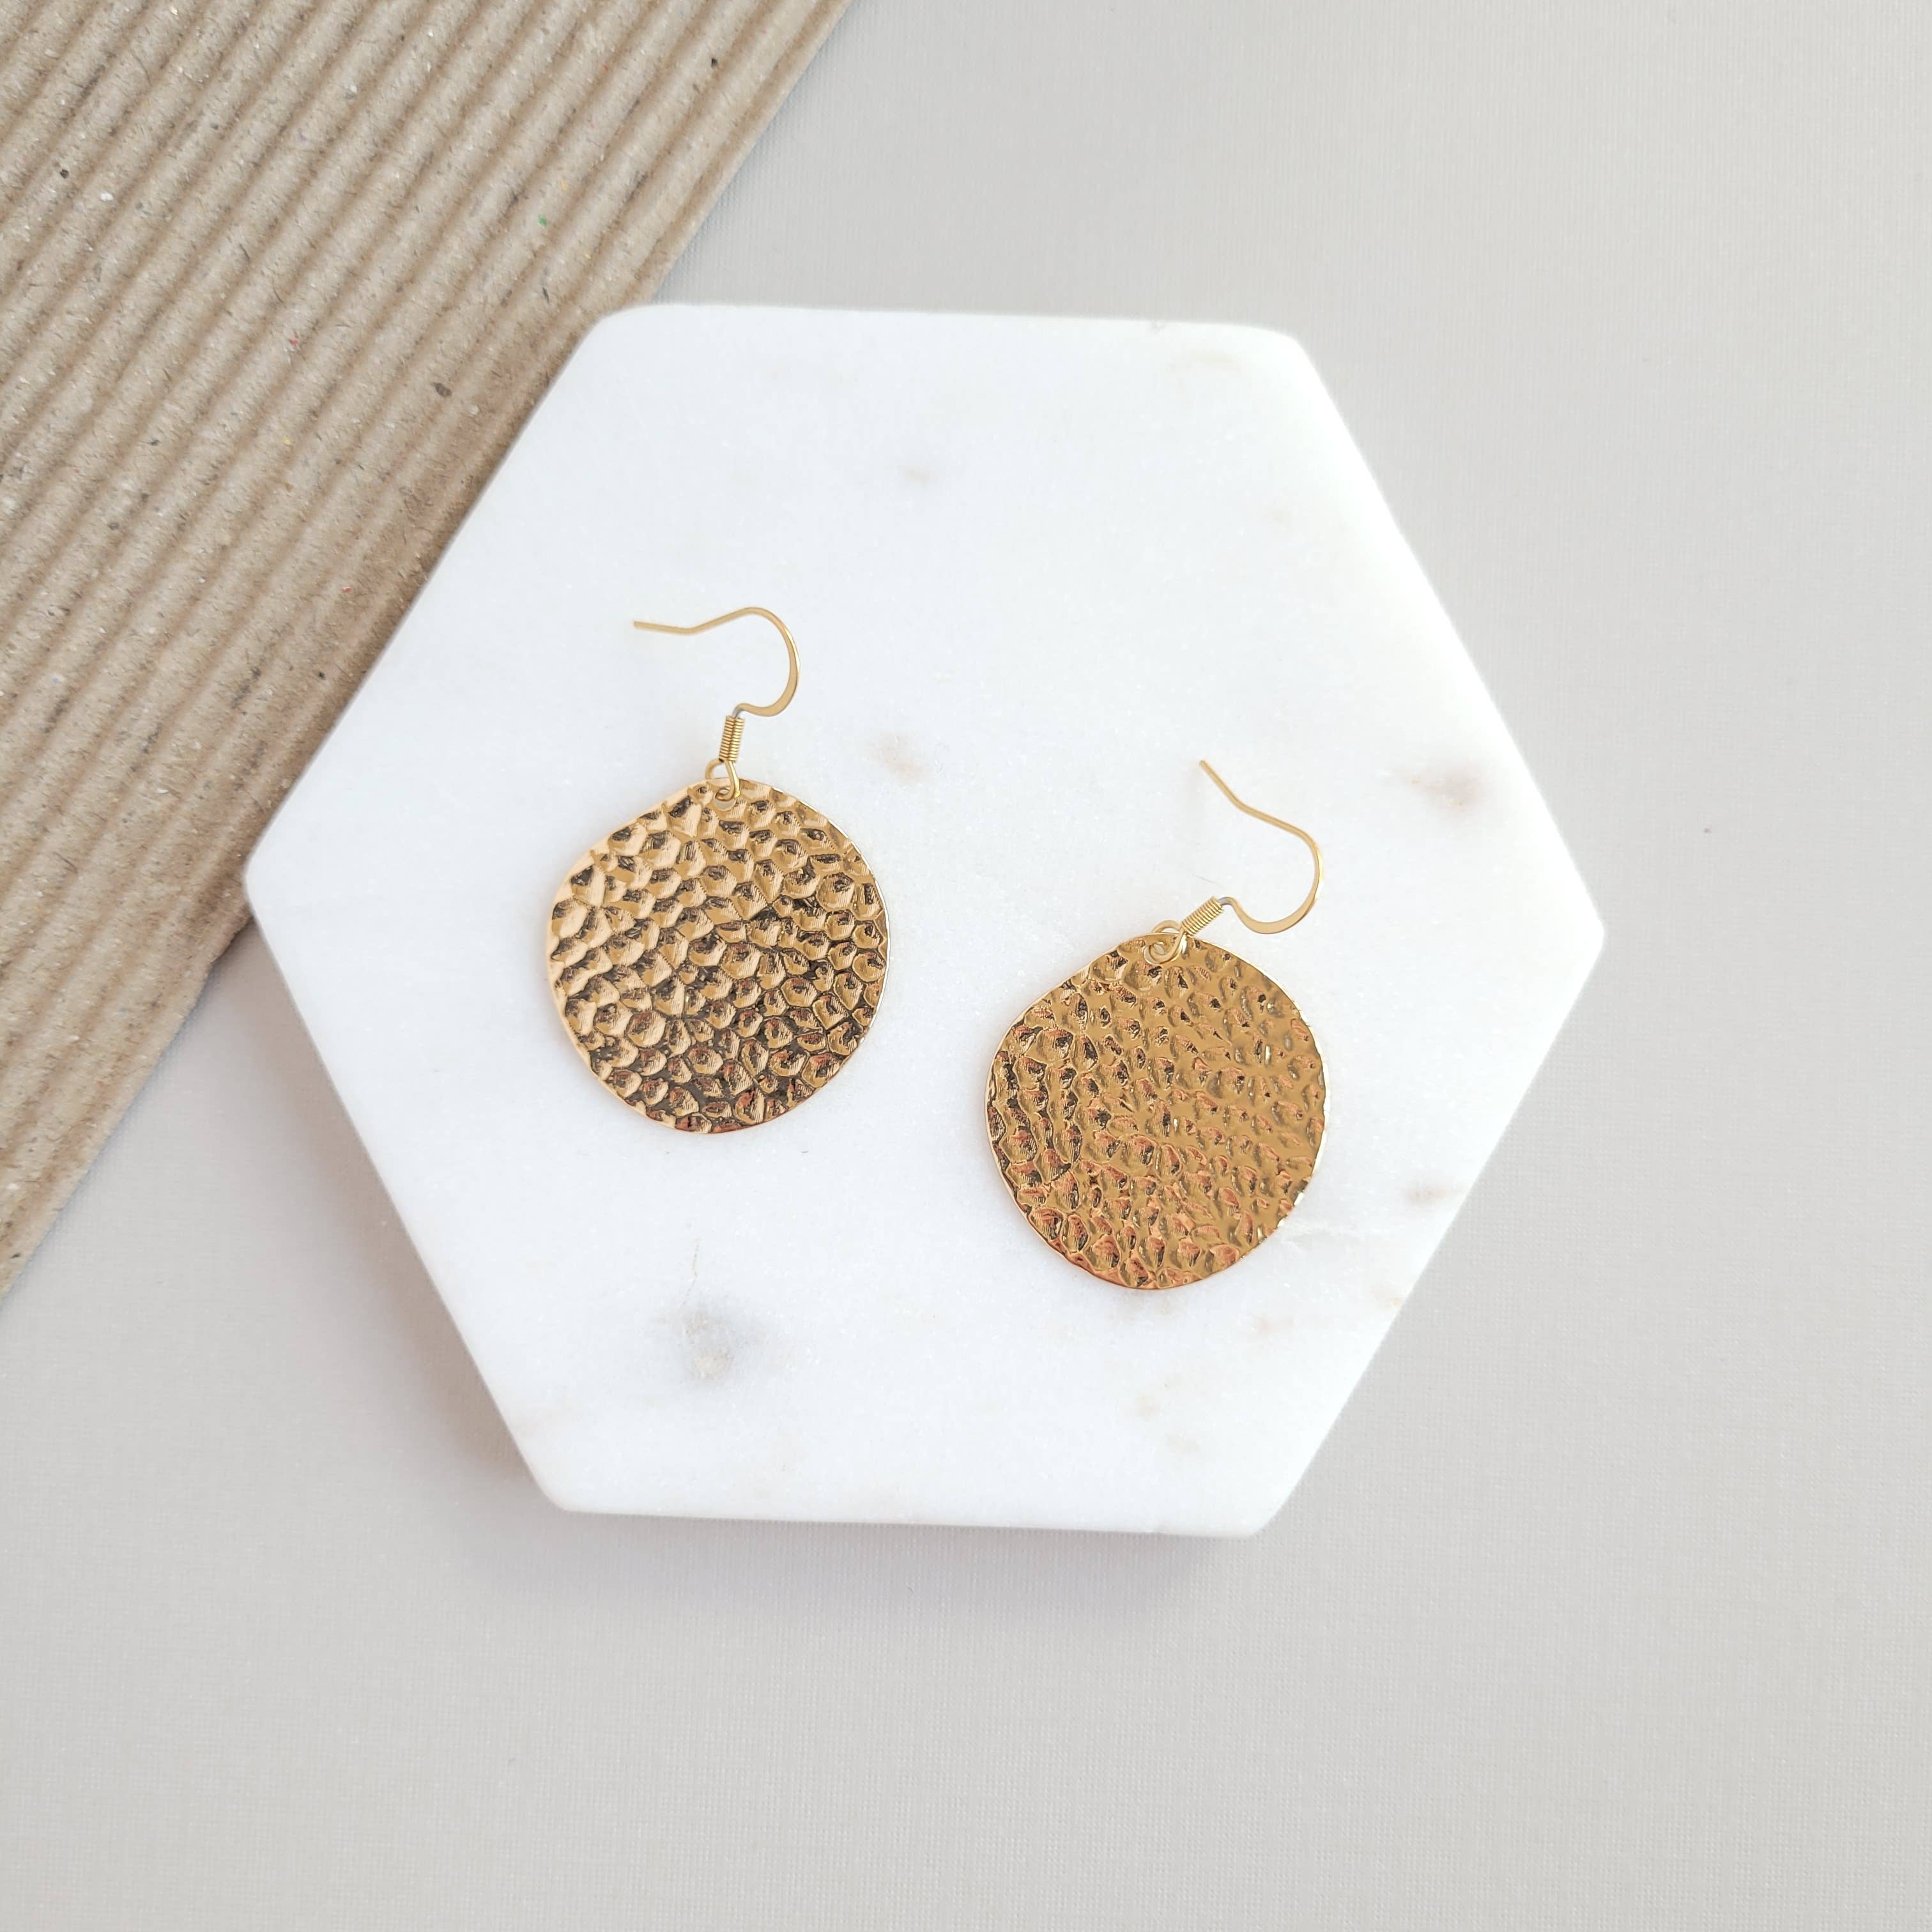 Gold Lucia Earrings by Spiffy and Splendid.